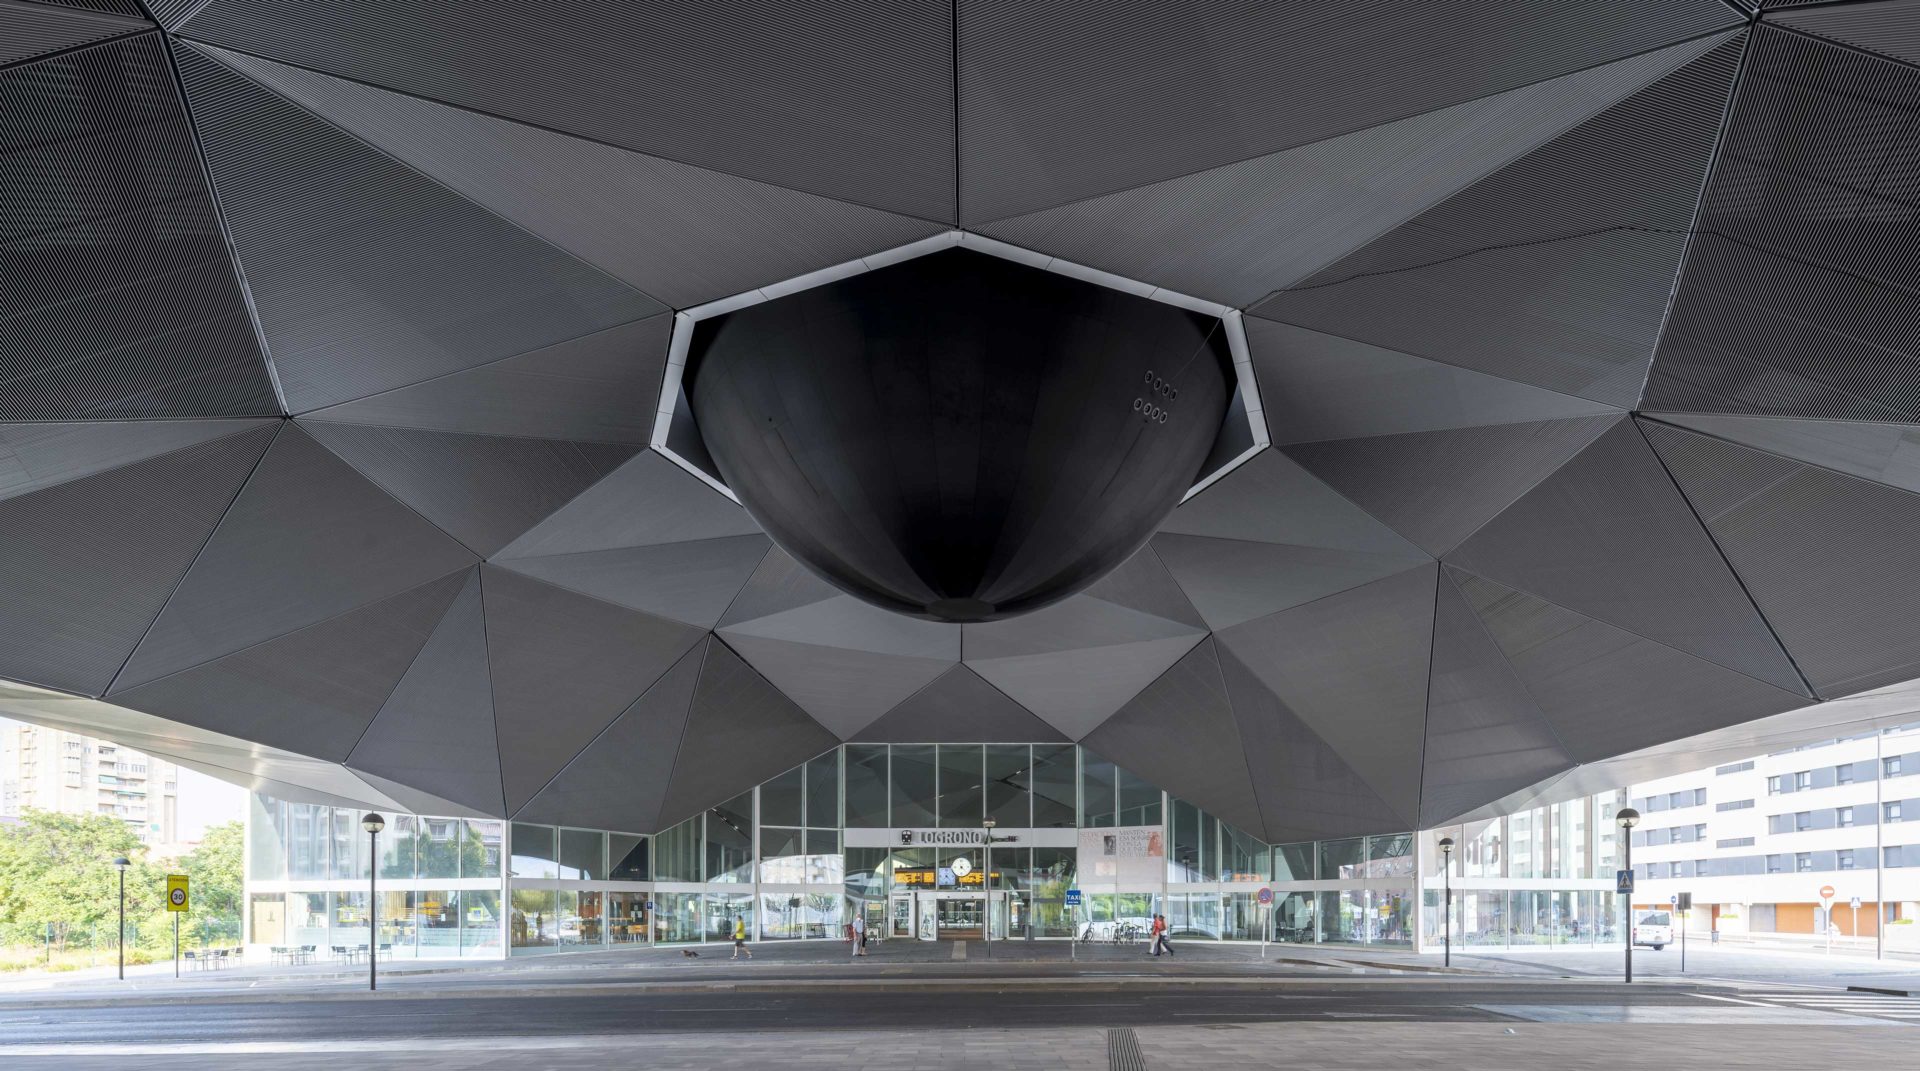 BLACKOUT Logroño - Spain 2021 Concéntrico 07 Festival Intermodal Station Dome. With the collaboration of Logroño Integración del Ferrocarril Black sphere of 15m of diameter installed in the oculus of a main train station.